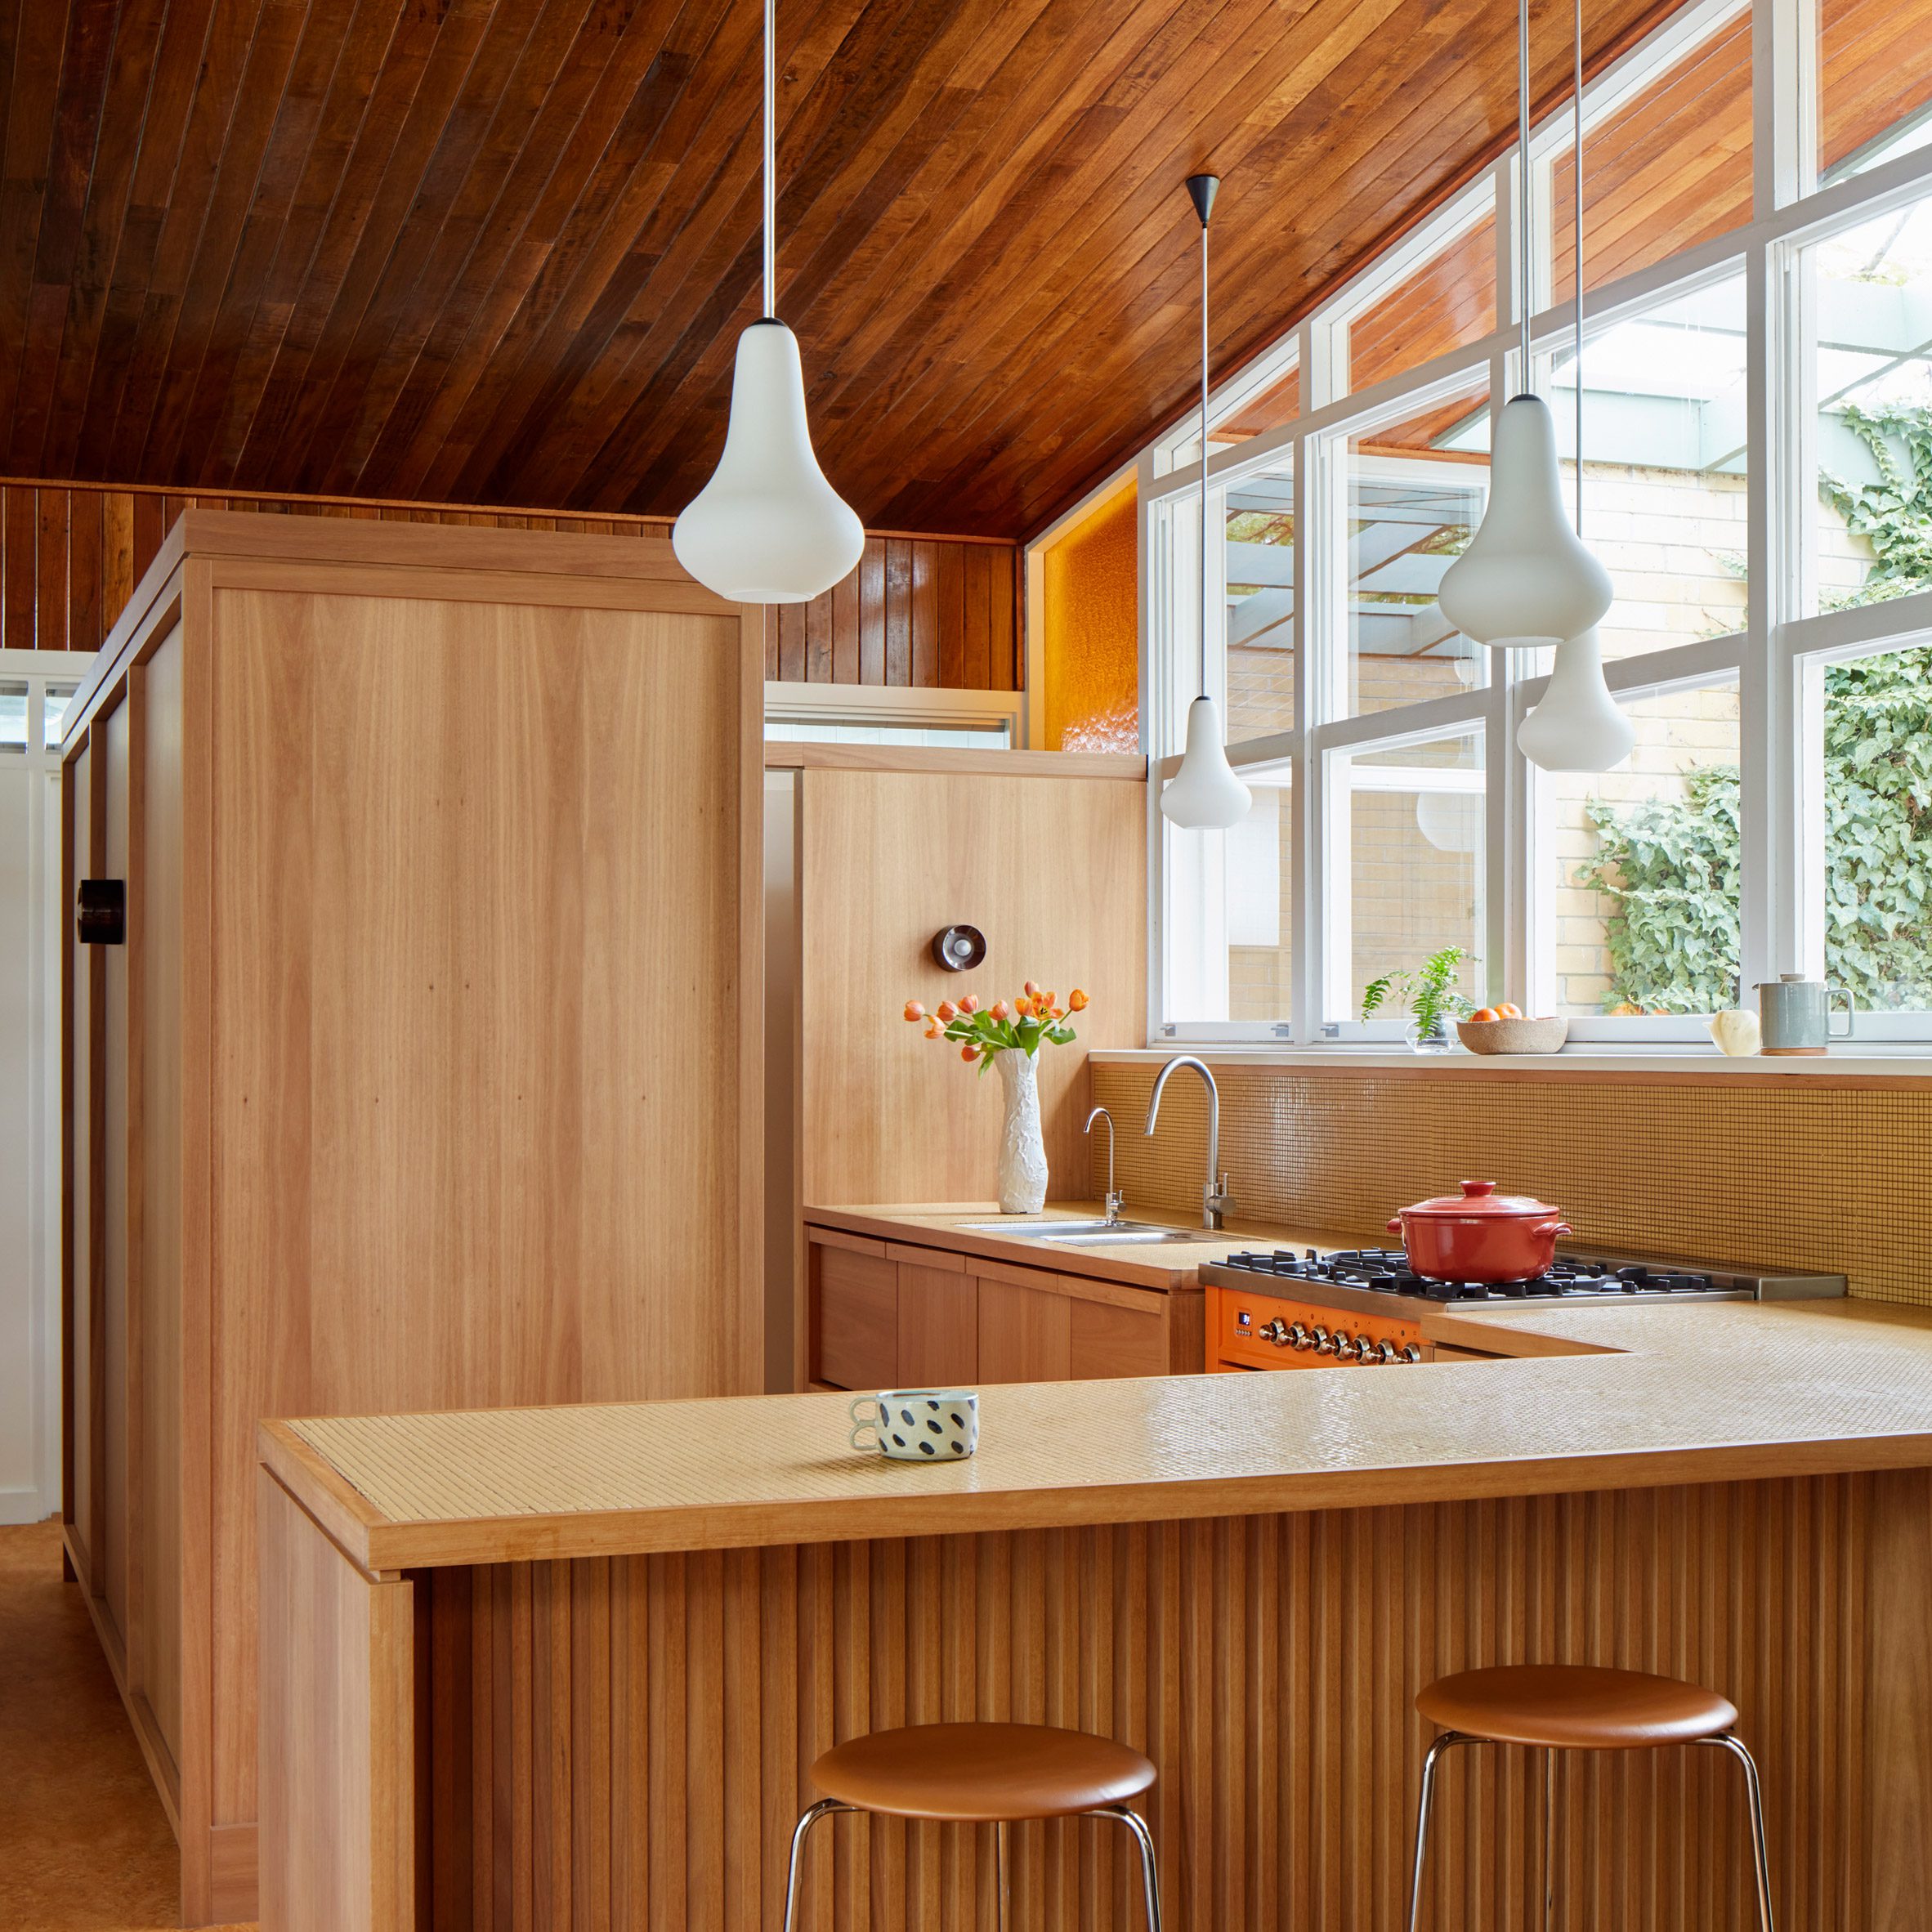 The Remodel Of This Mid-Century Modern Home Is Filled With Design